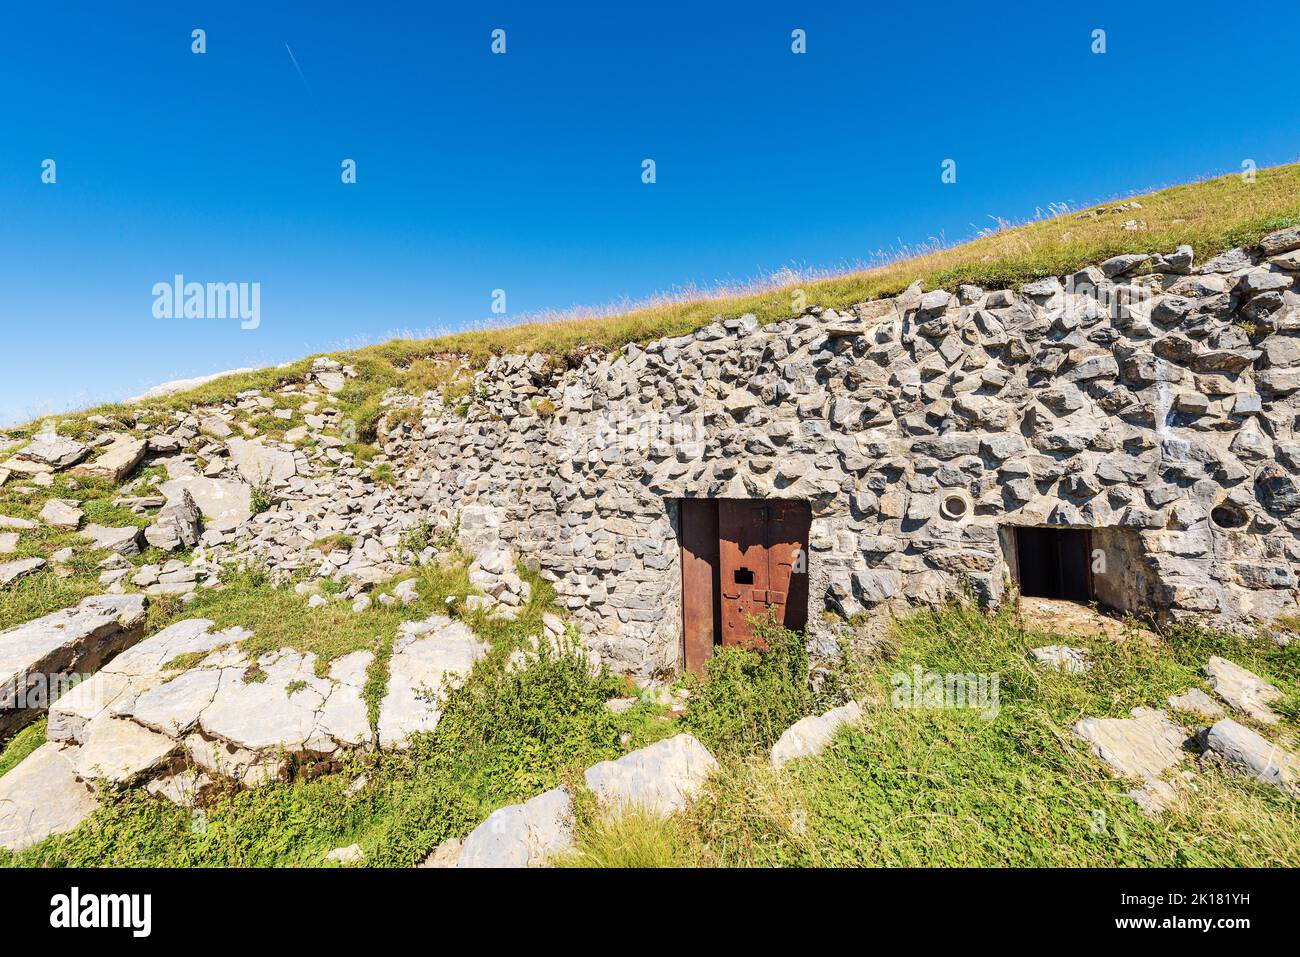 Bunker or fortress of the second world war, Trekking footpath to the Mountain Peak of Osternig or Oisternig, Carnic Alps, Italy-Austria border, Europe. Stock Photo